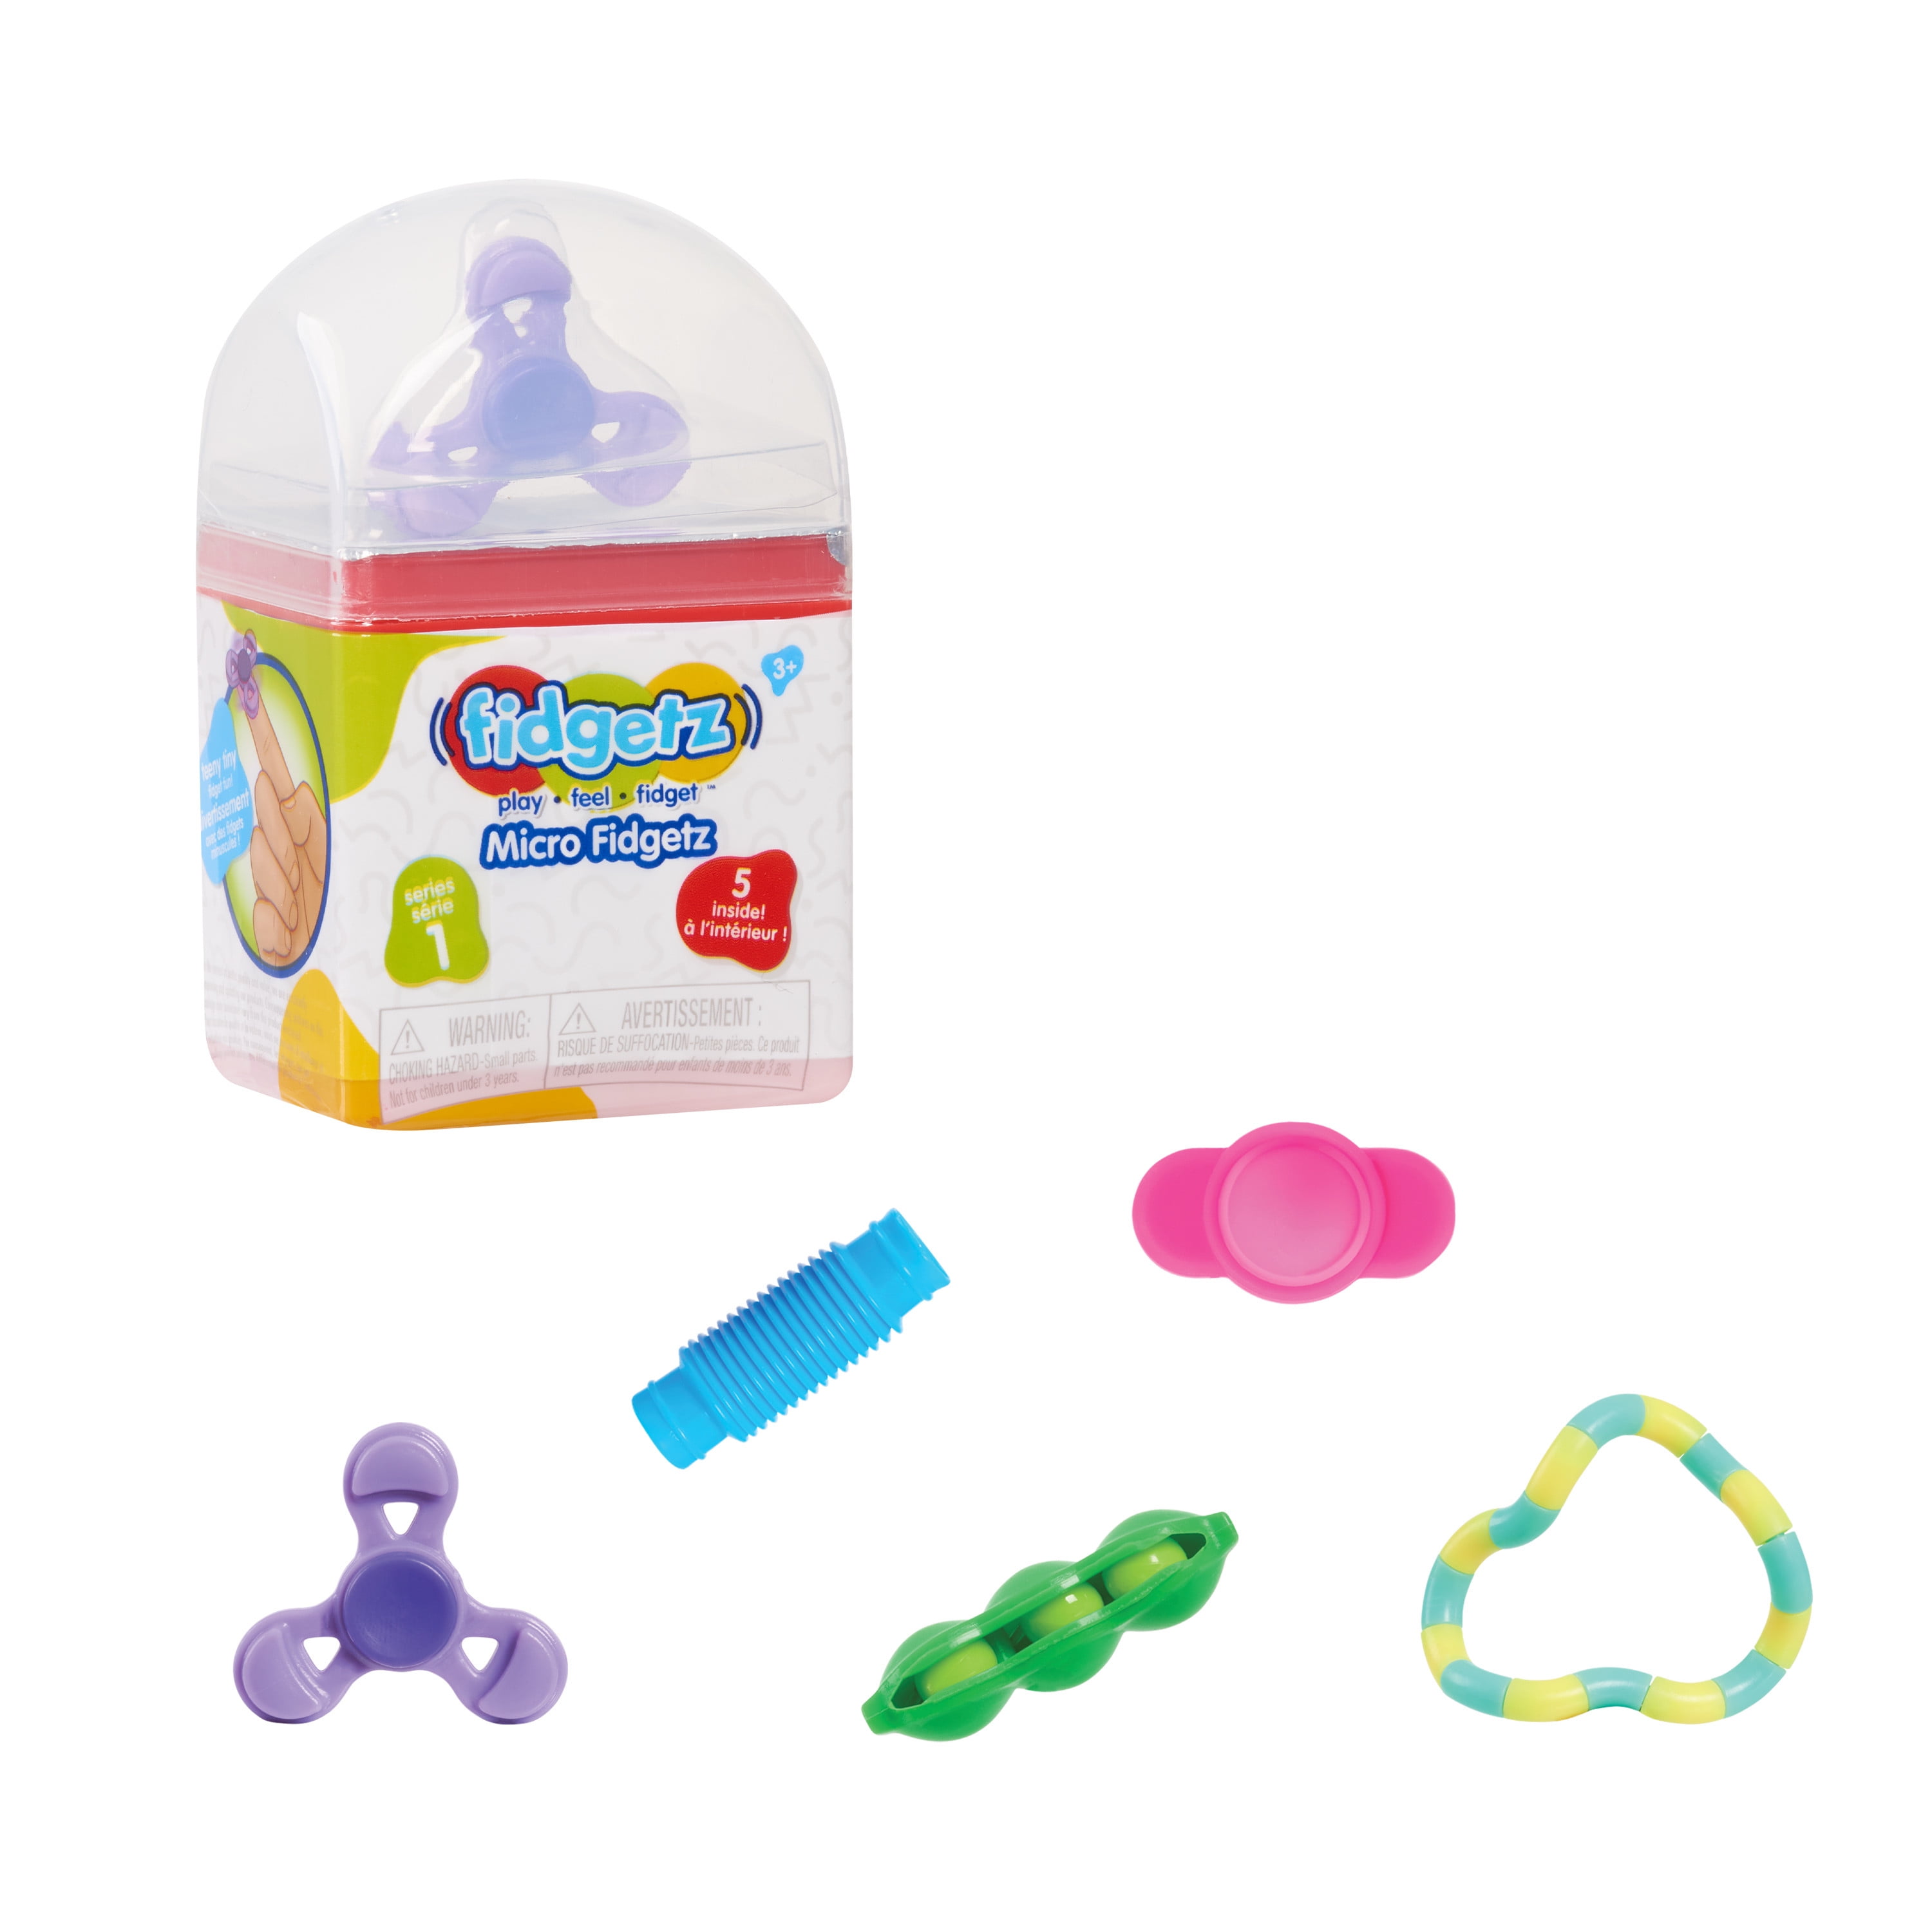 Fidgetz 5-Piece Micro Sensory & Fidget Toys in Blind Capsule, Sold Styles May Vary, Kids Toys for Ages 3 Up, Gifts and Presents - Walmart.com